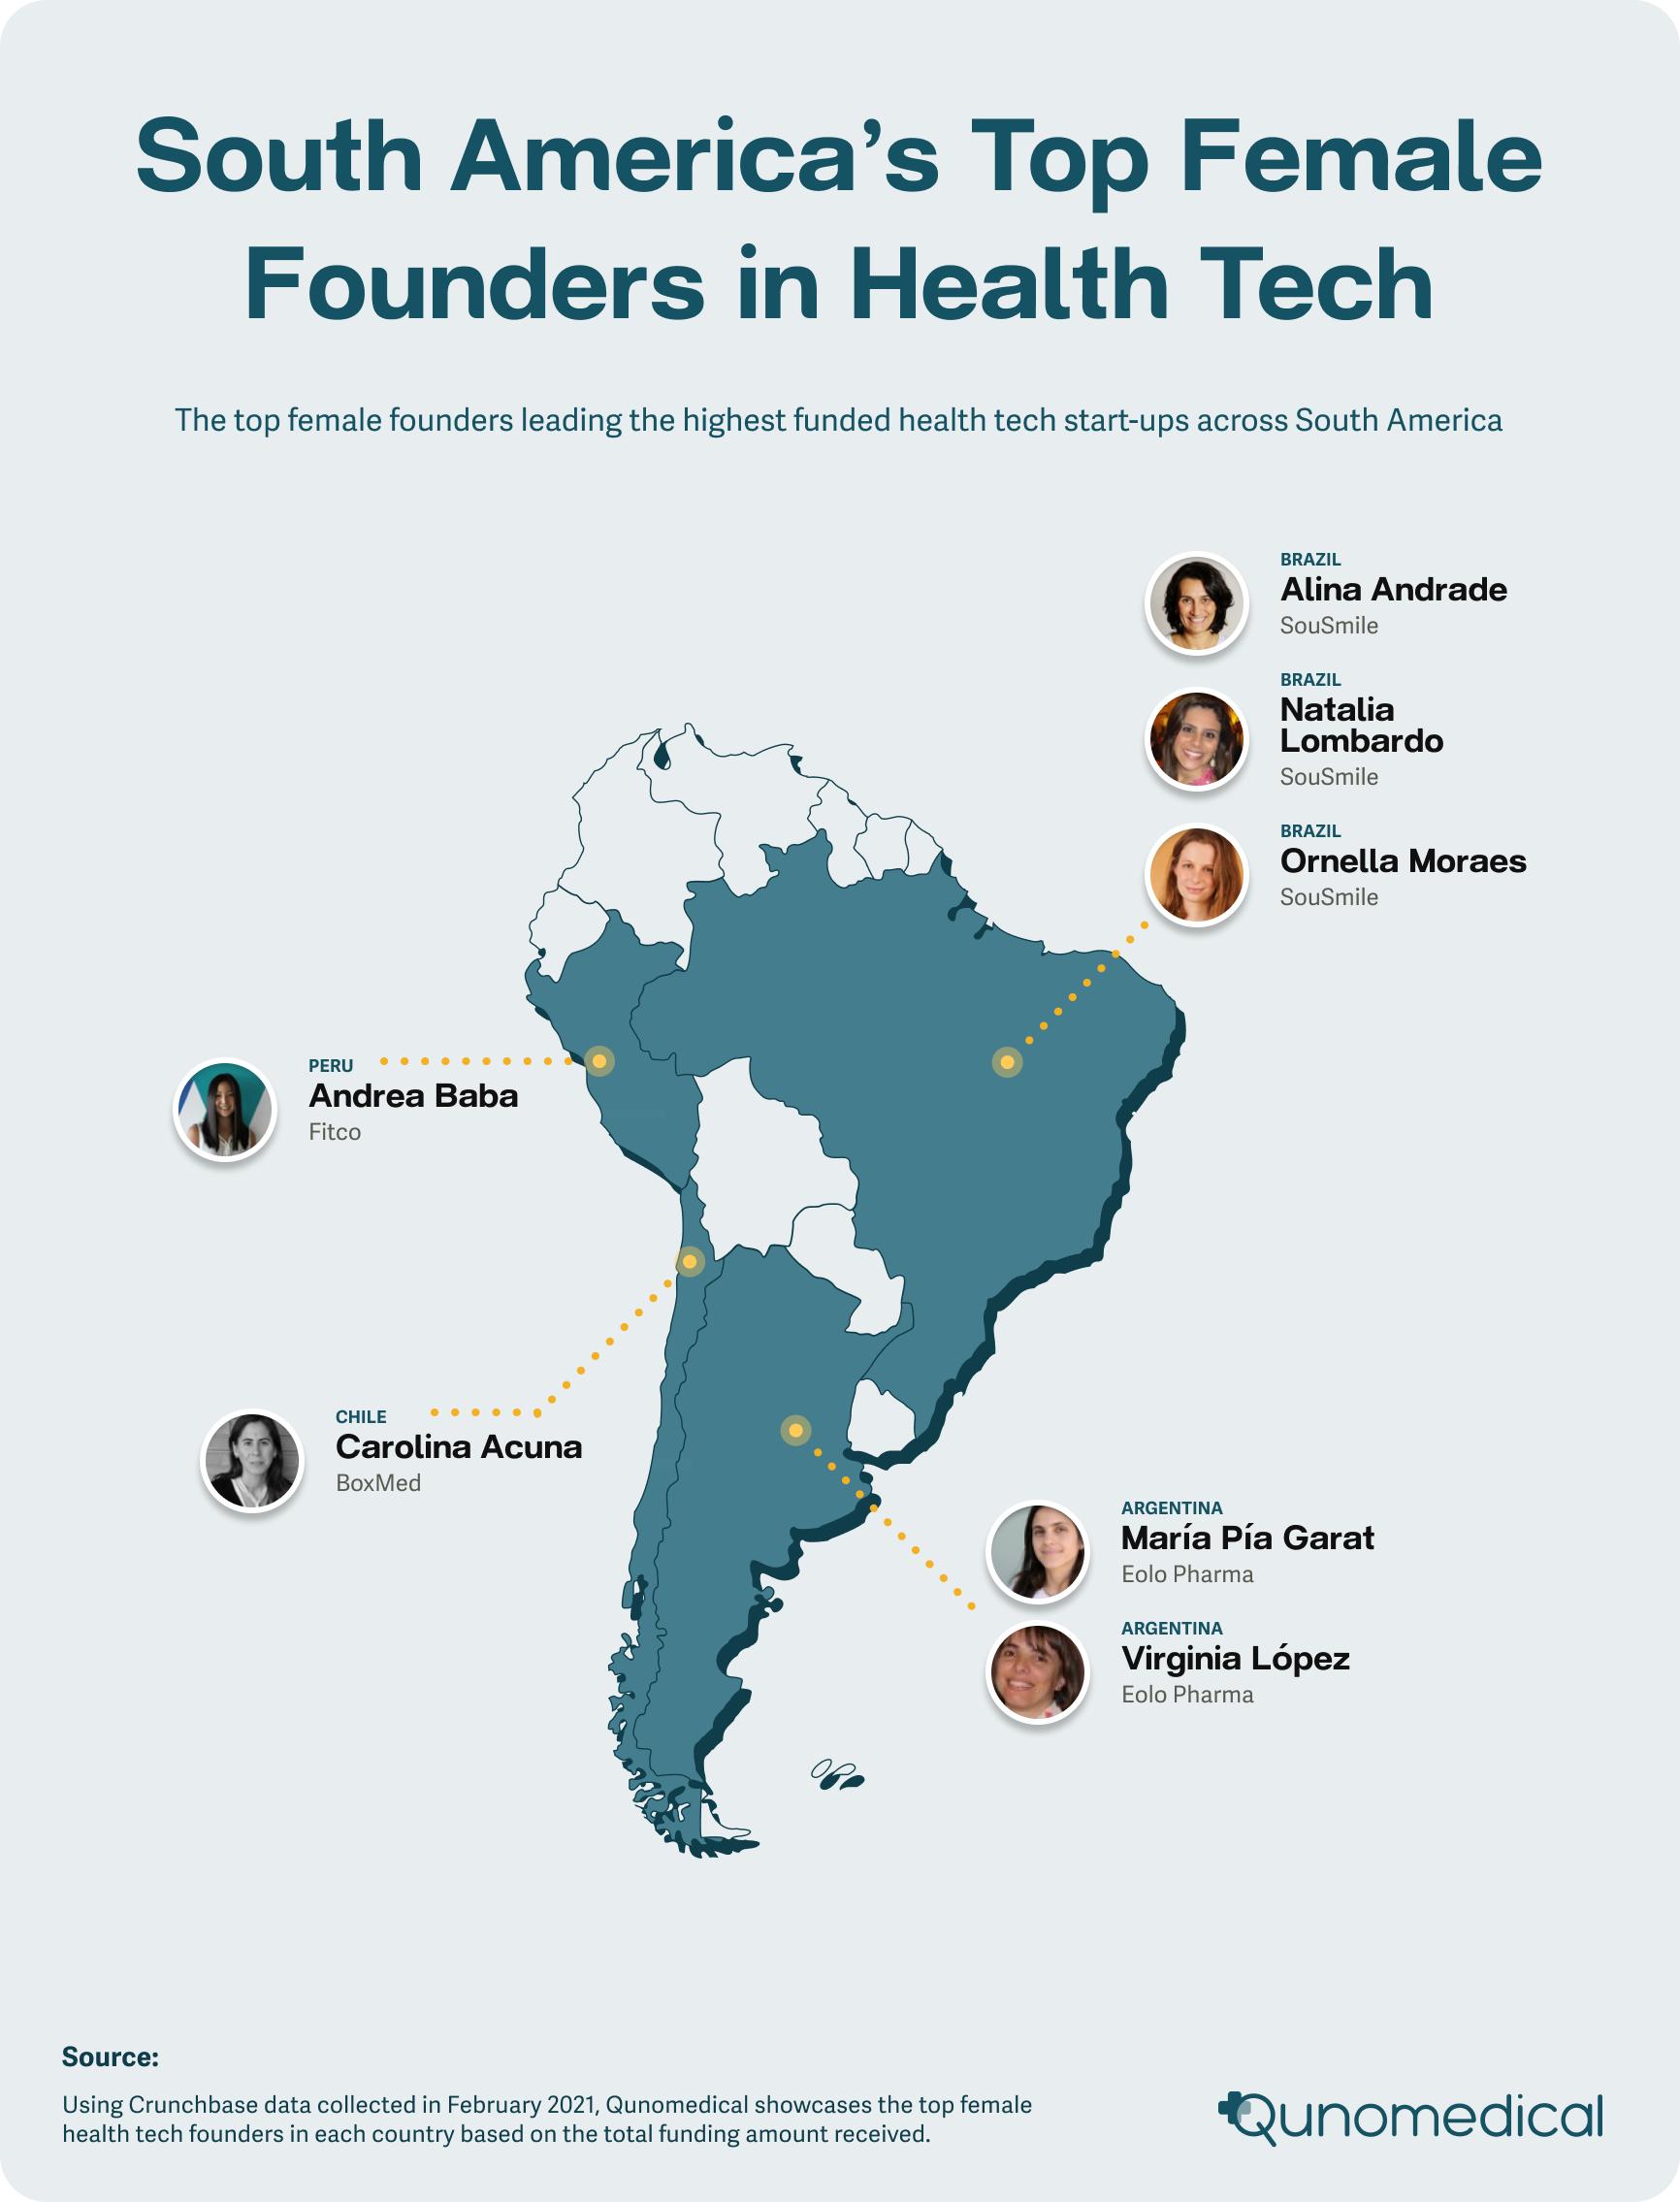 The health tech start-up scene in South America is emerging gradually. With an overall number of 187 start-ups, those with at least one female founder account for nearly 20%.